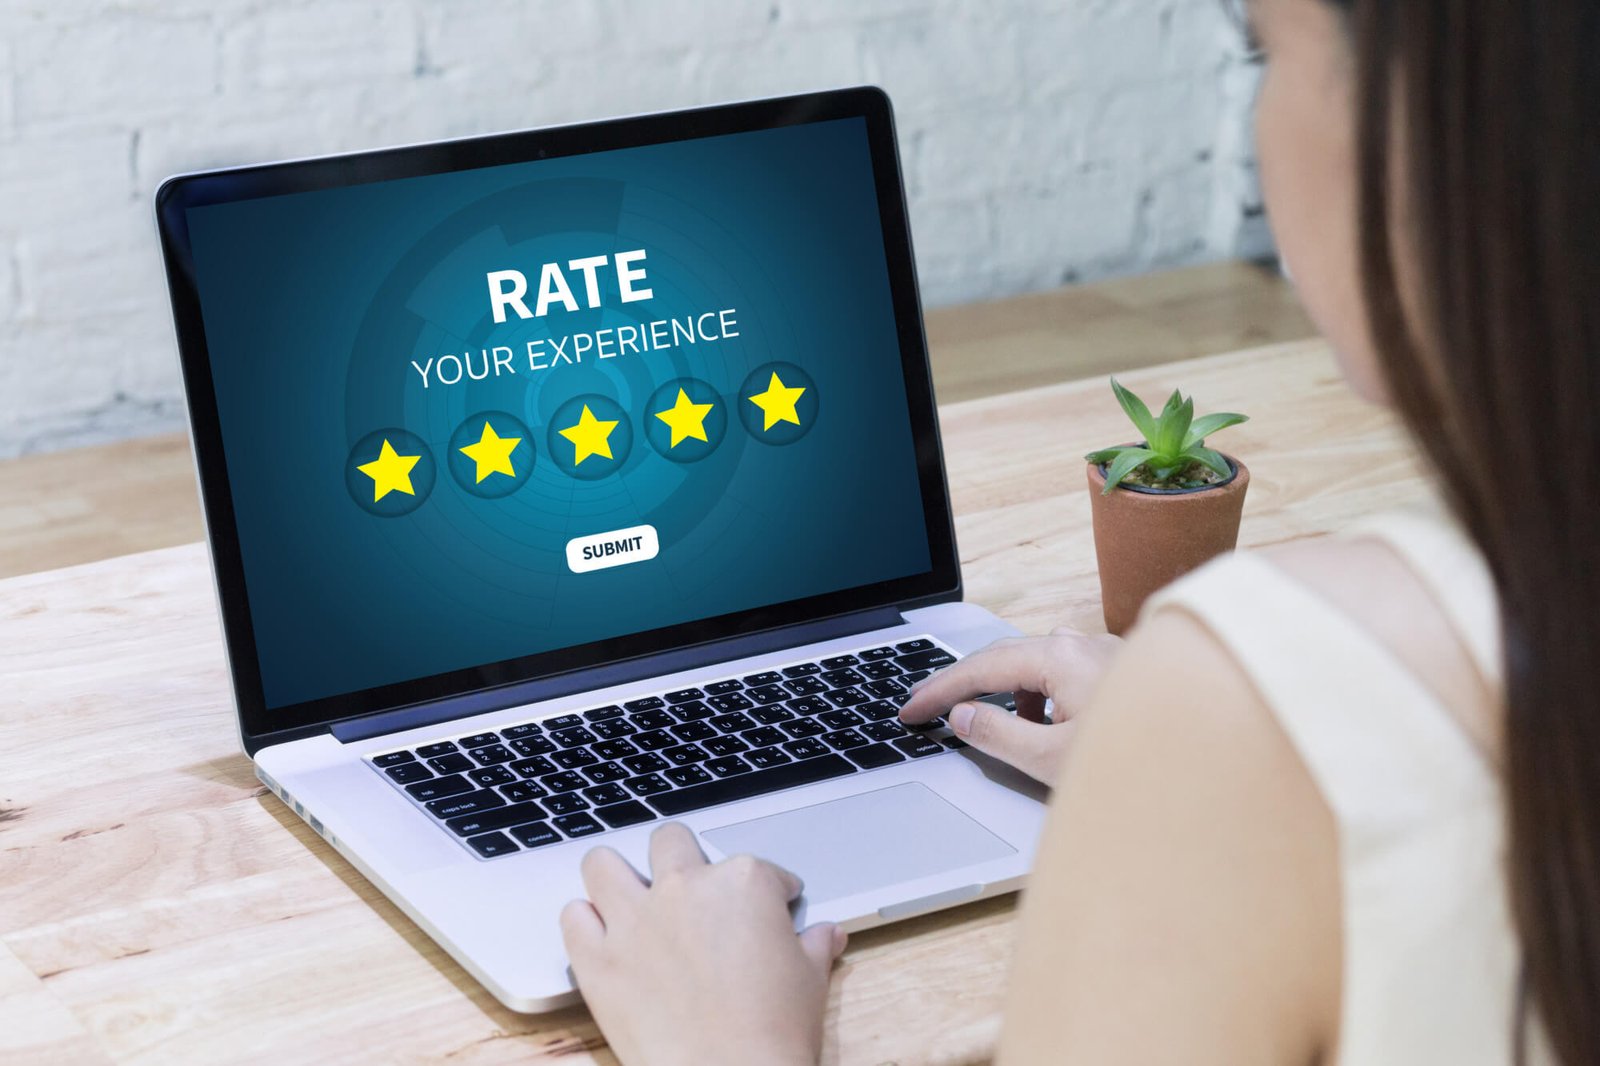 Online Reviews Help Your Business